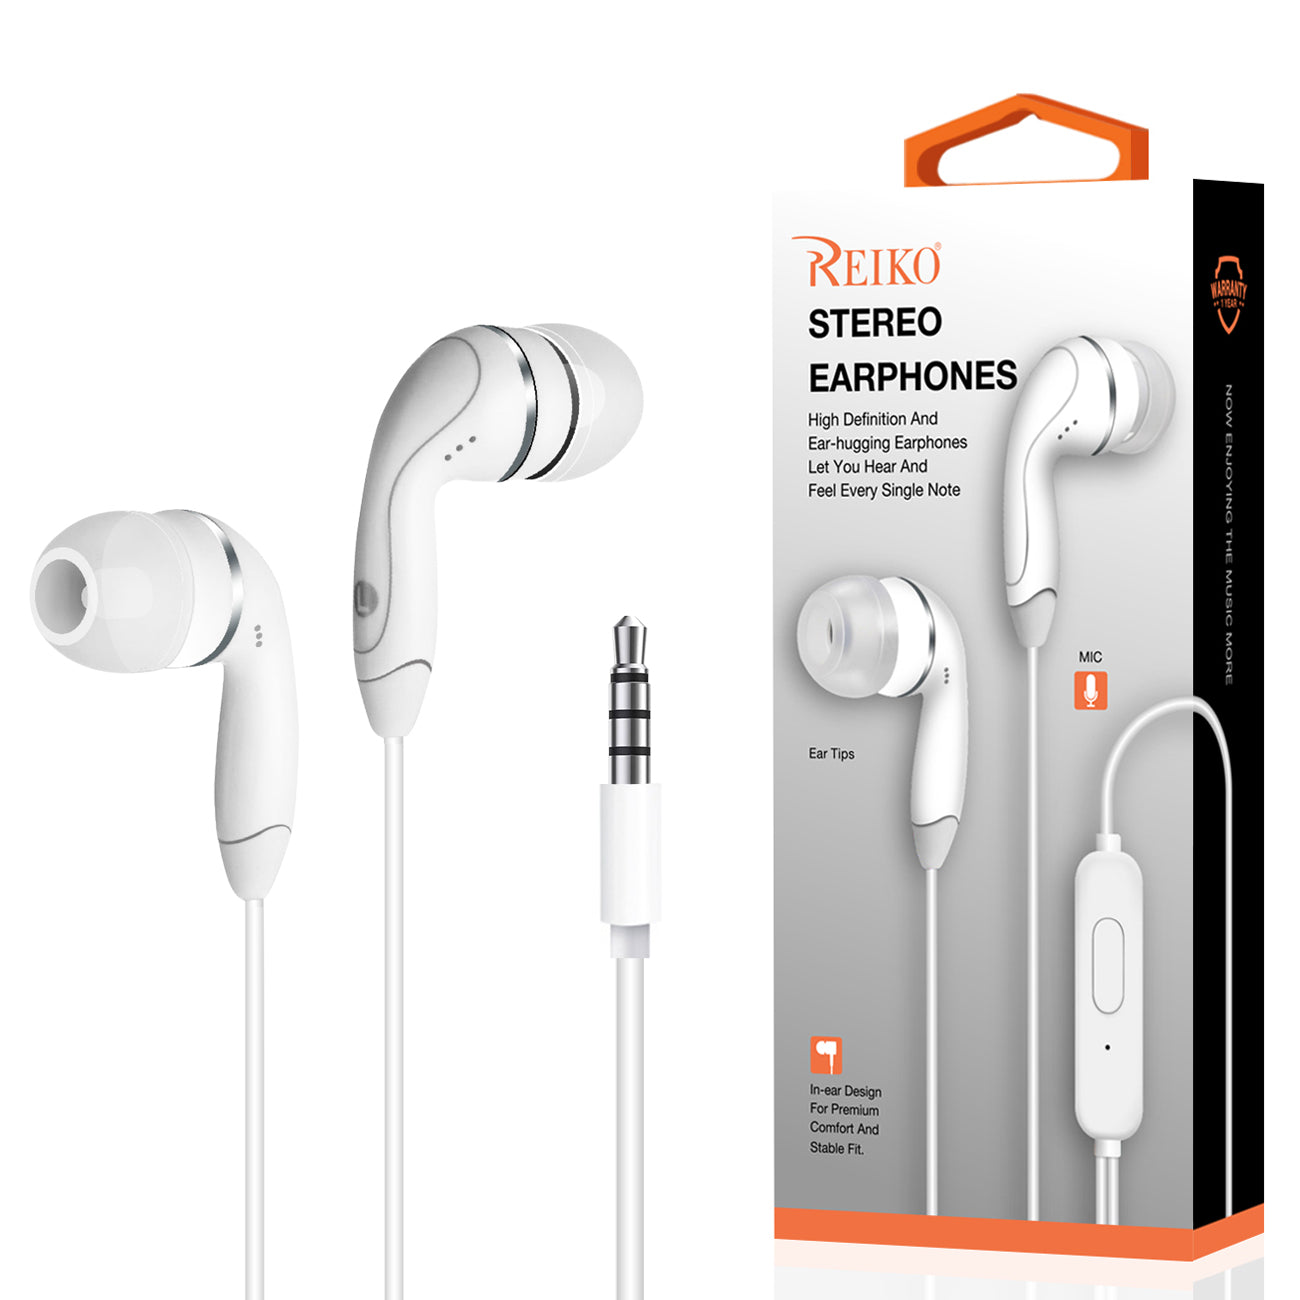 In-Ear Headphones With Mic In White